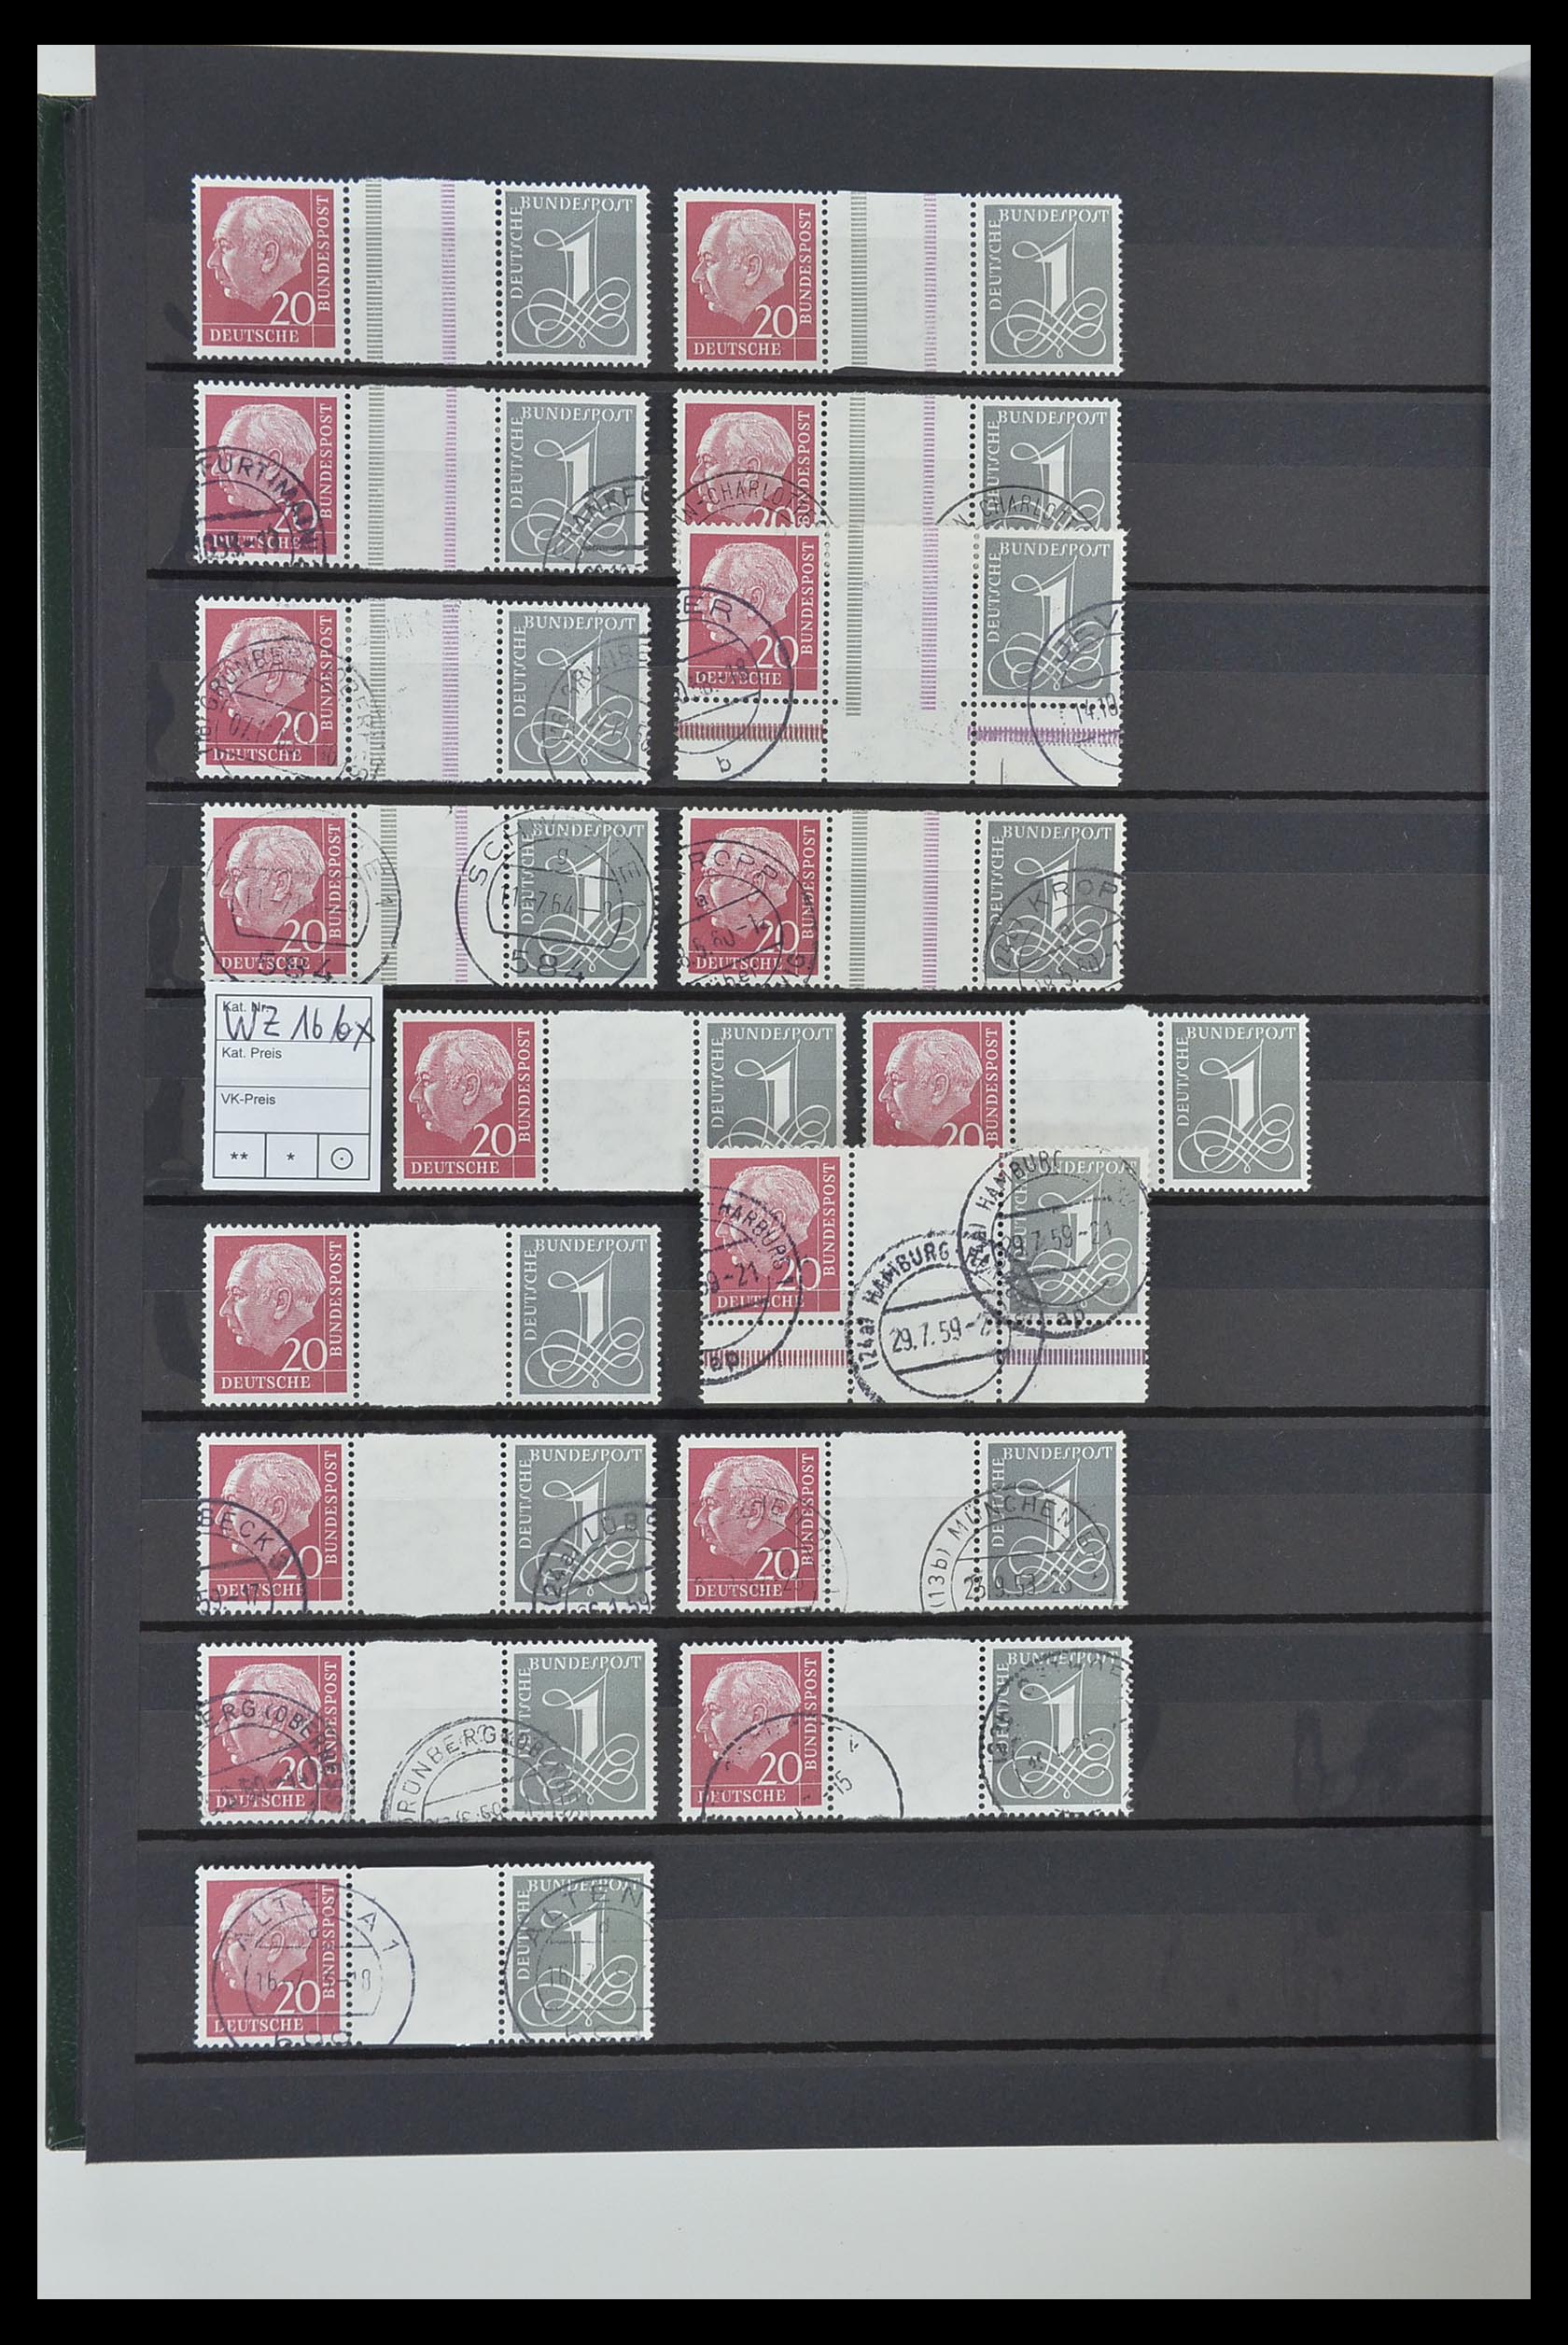 33275 022 - Stamp collection 33275 Bundespost combinations 1951-1960.